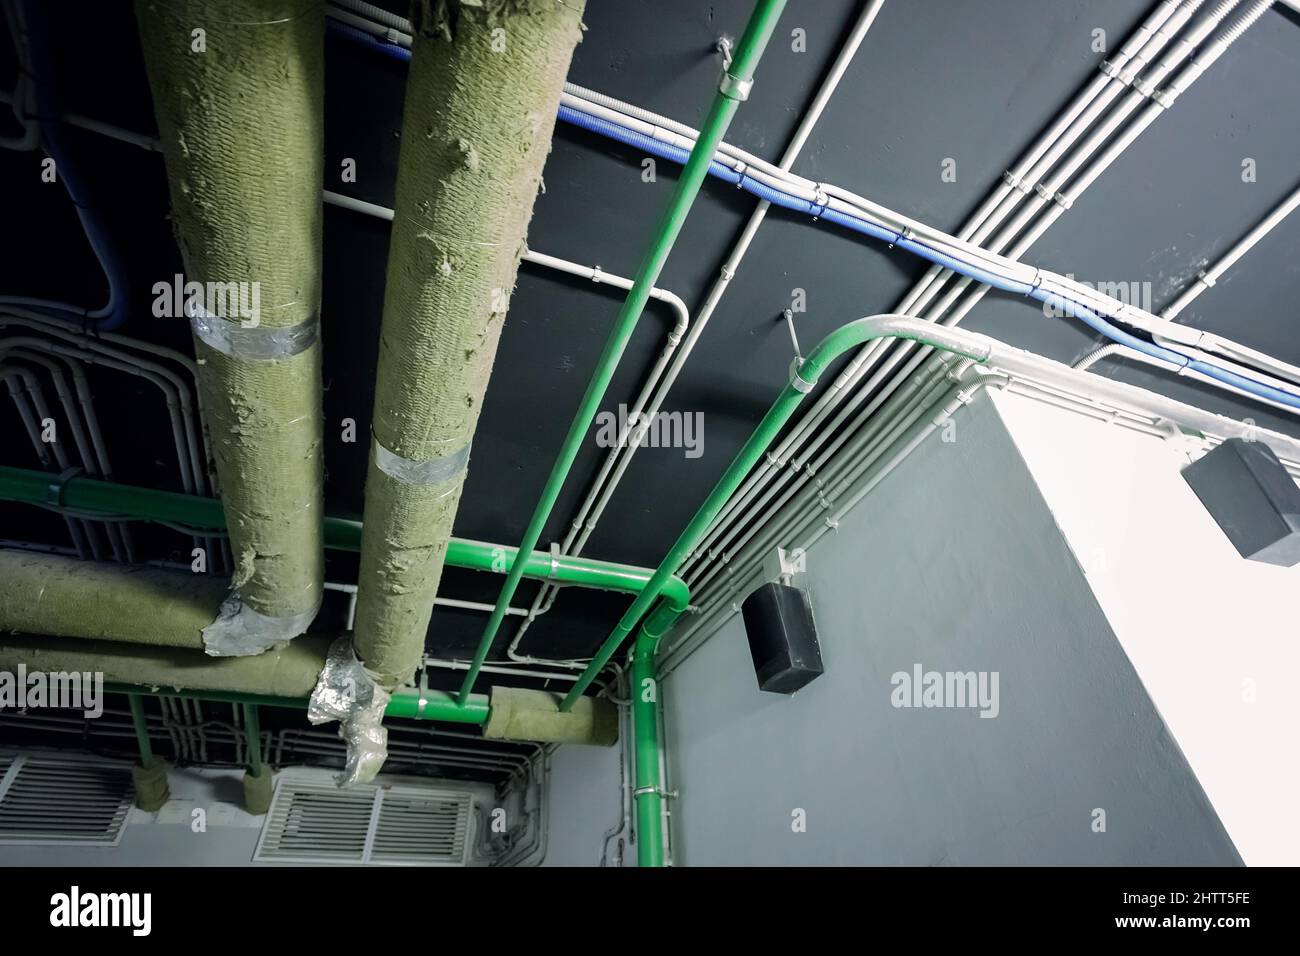 Laying of engineering networks. Ventilation pipes. Air conditioning in buildings. Pipe installation. Maintenance of cable networks. Abstract industria Stock Photo